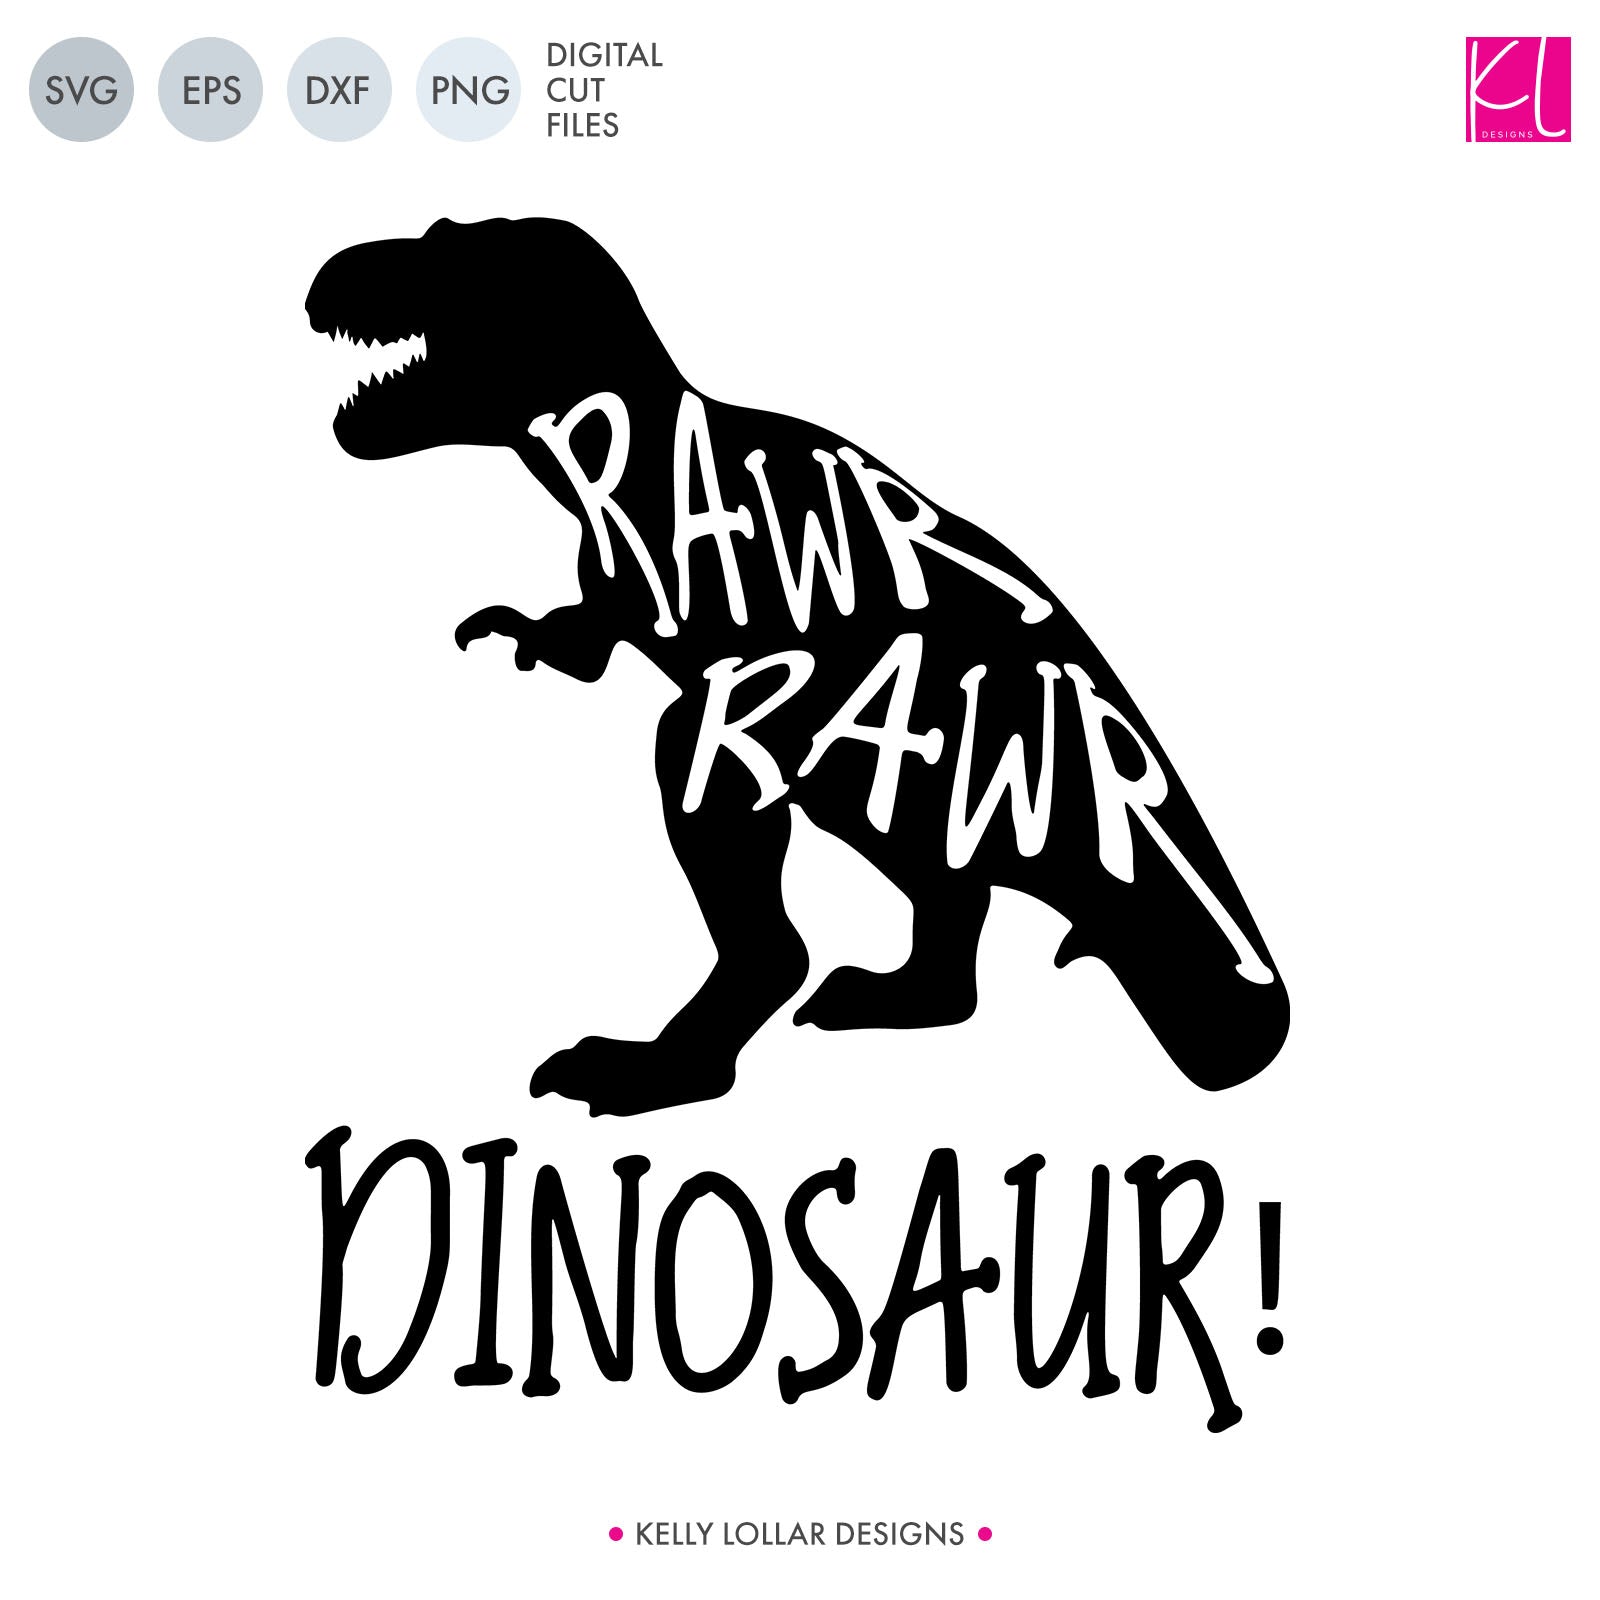 Rawr Rawr Dinosaur T-rex Quote | SVG DXF EPS PNG Cut Files | Free for Commercial Use